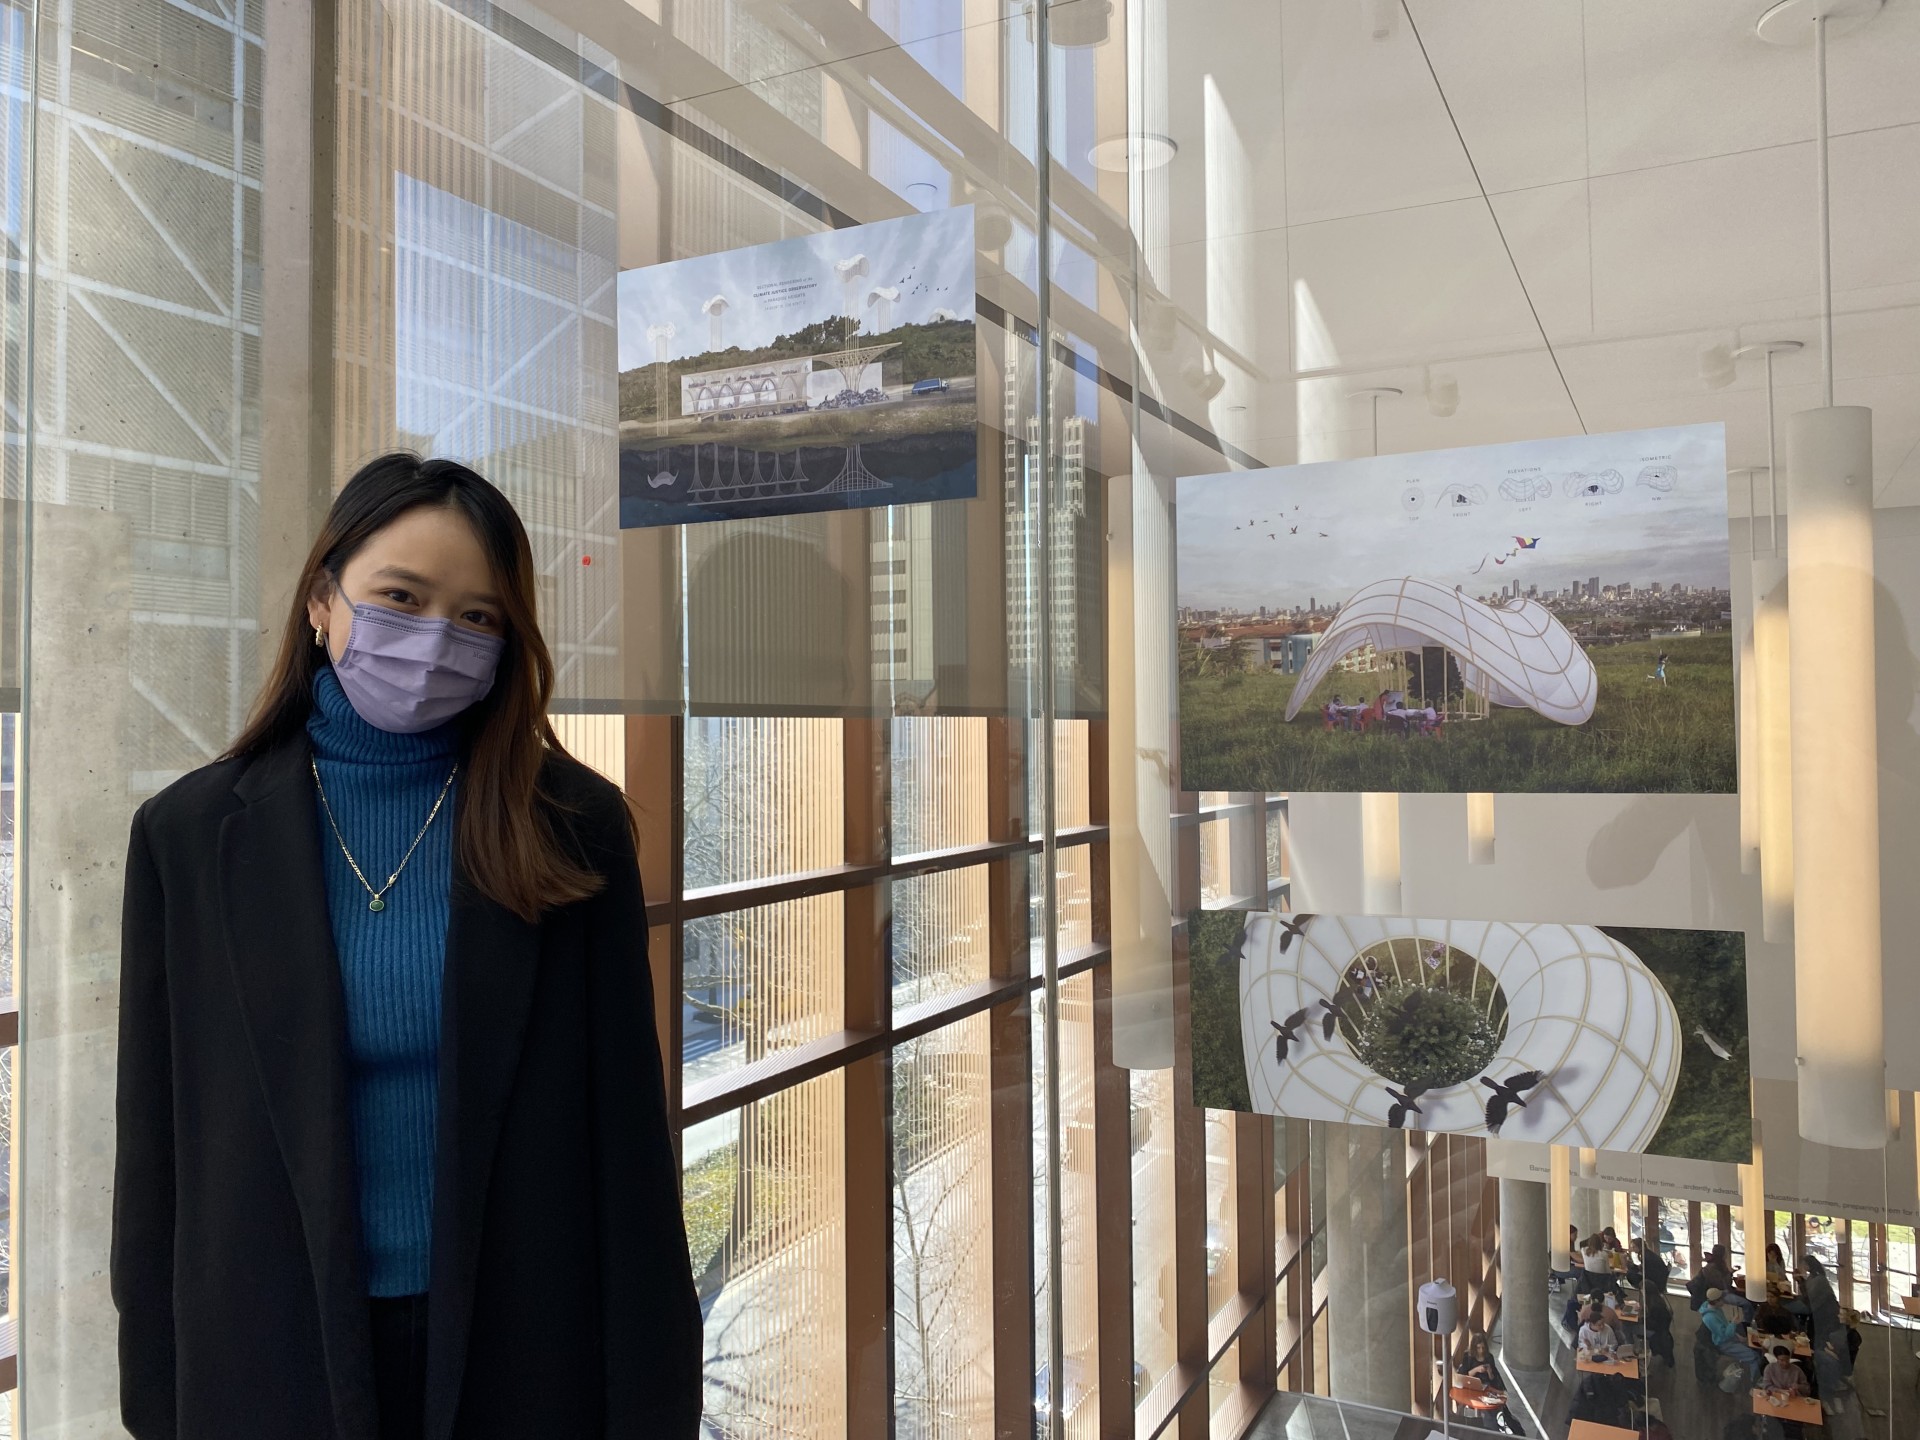 Shannon Hui wears a mask and stands beside three architectural renderings on the wall